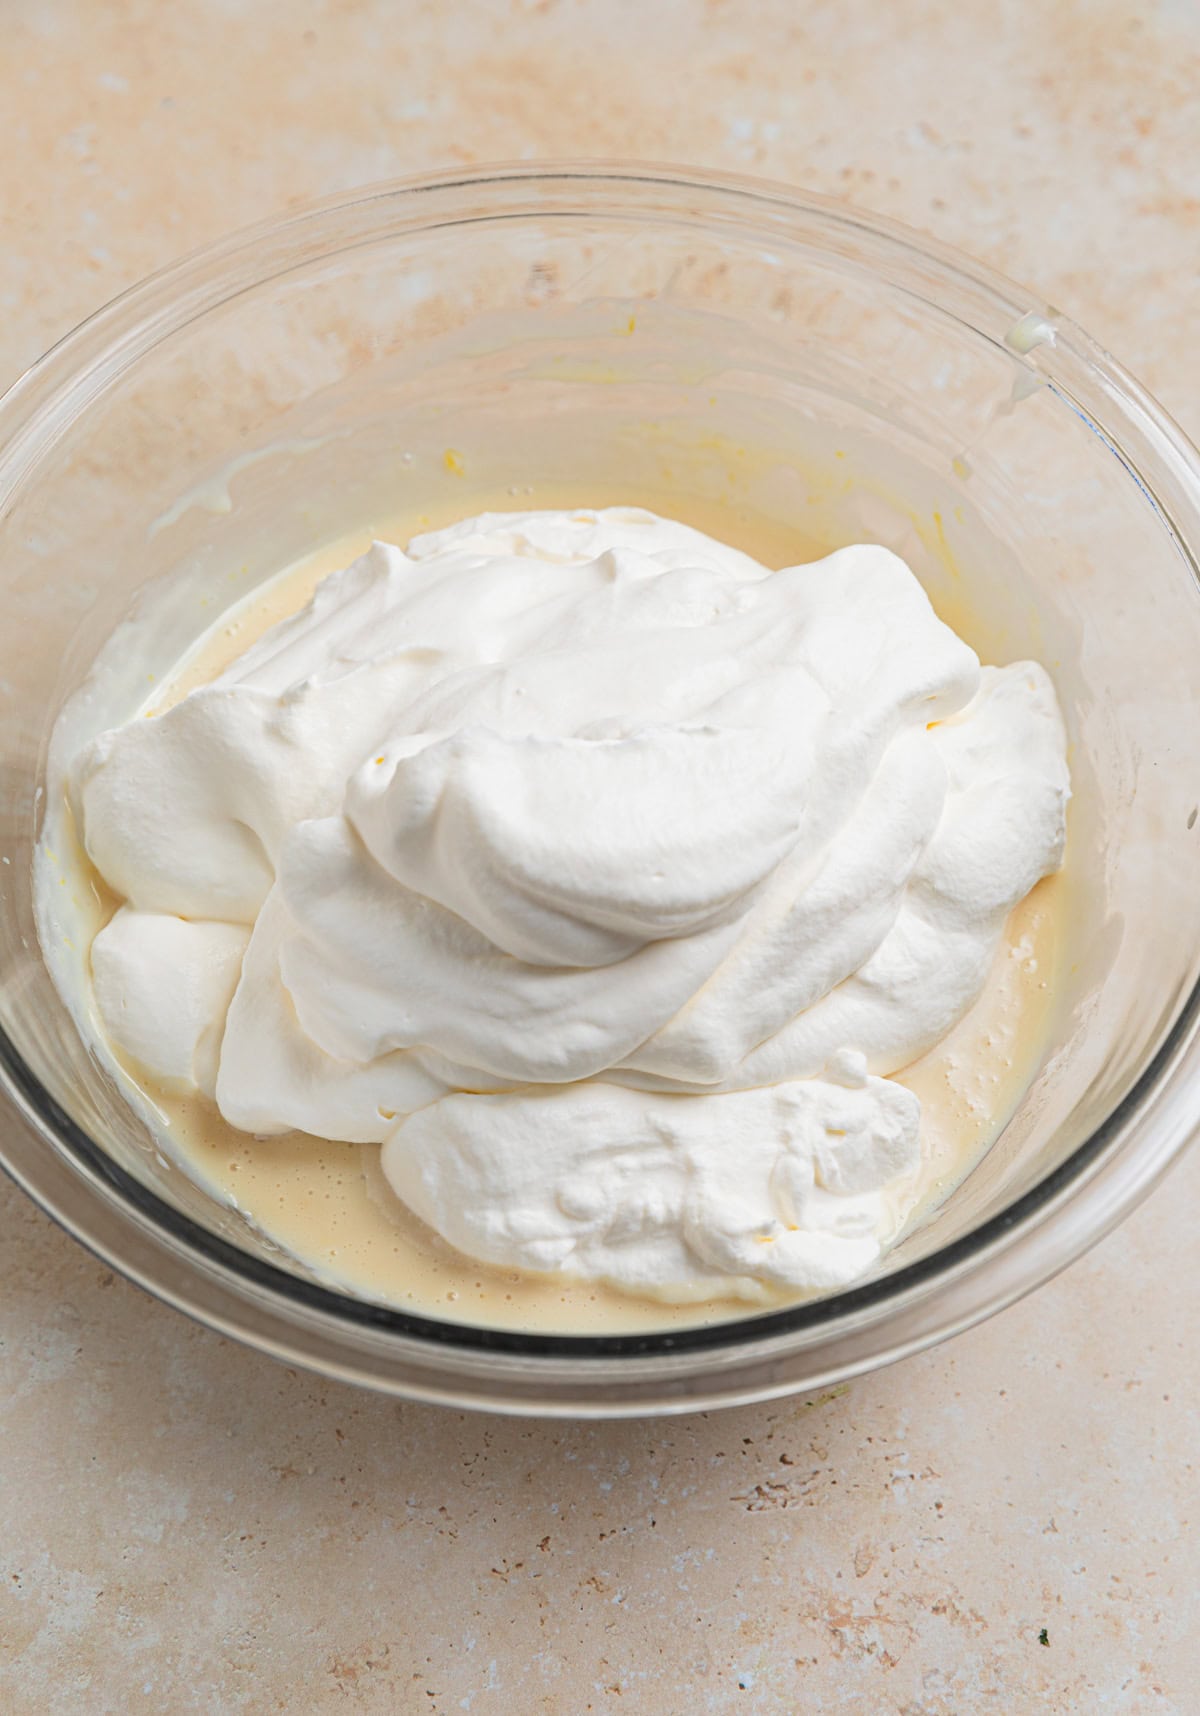 Whipped cream and condensed milk mixture in glass mixing bowl.